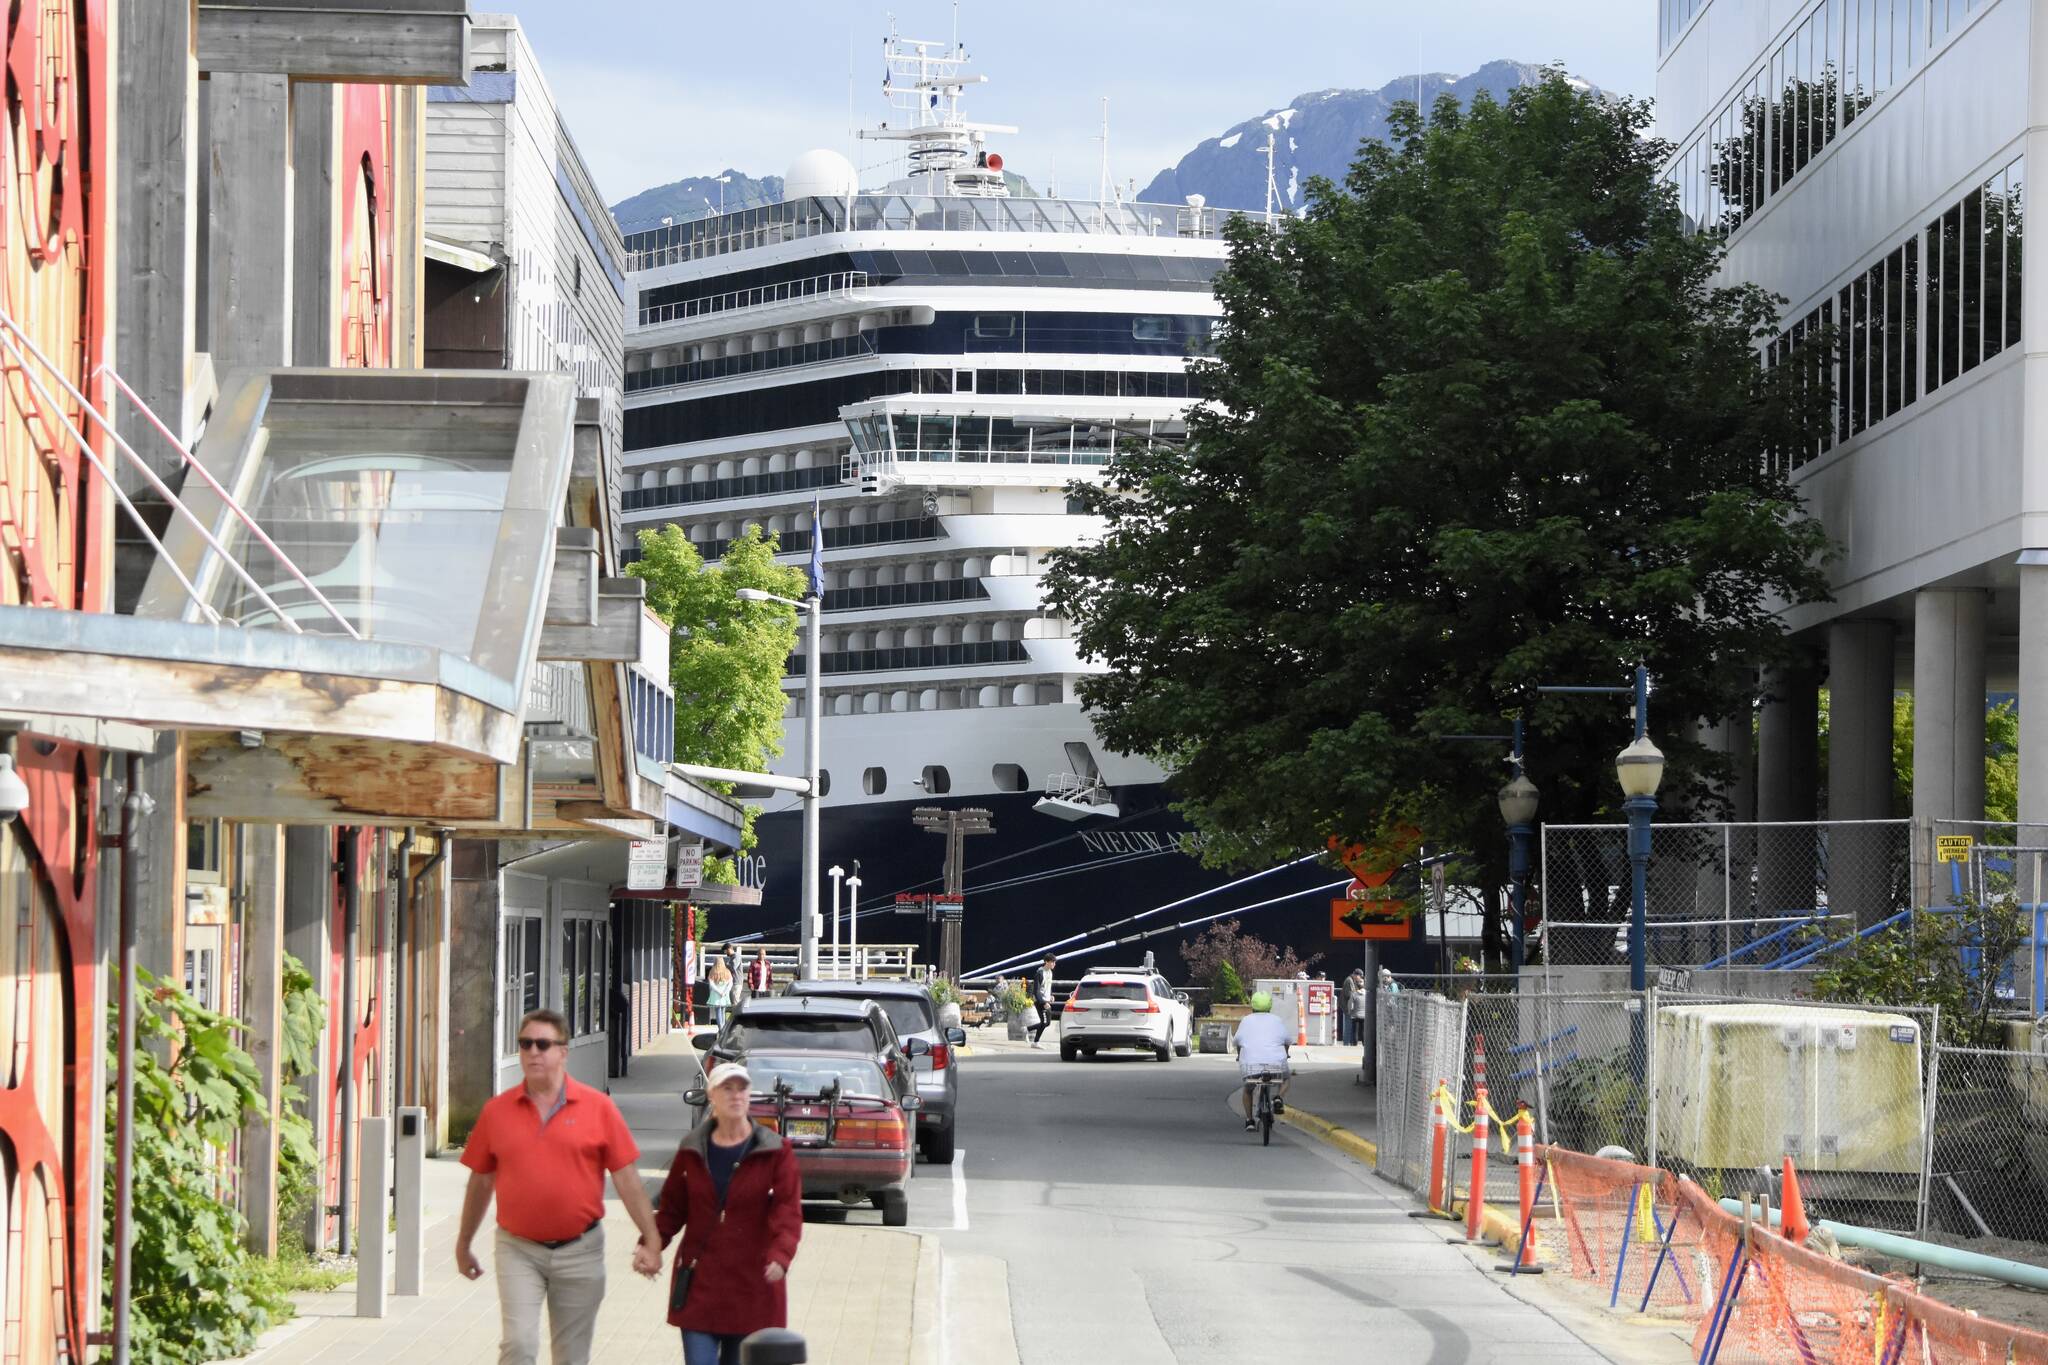 Industries related to cruise ships, like this one docked in downtown Juneau on July 26, 2021, were the most impacted by the COVID-19 pandemic according to a report from the McKinley Research Group. Senior economist at McKinley Jim Calvin says he's concerned about businesses ability to hire enough workers going forward. (Peter Segall / Juneau Empire file)